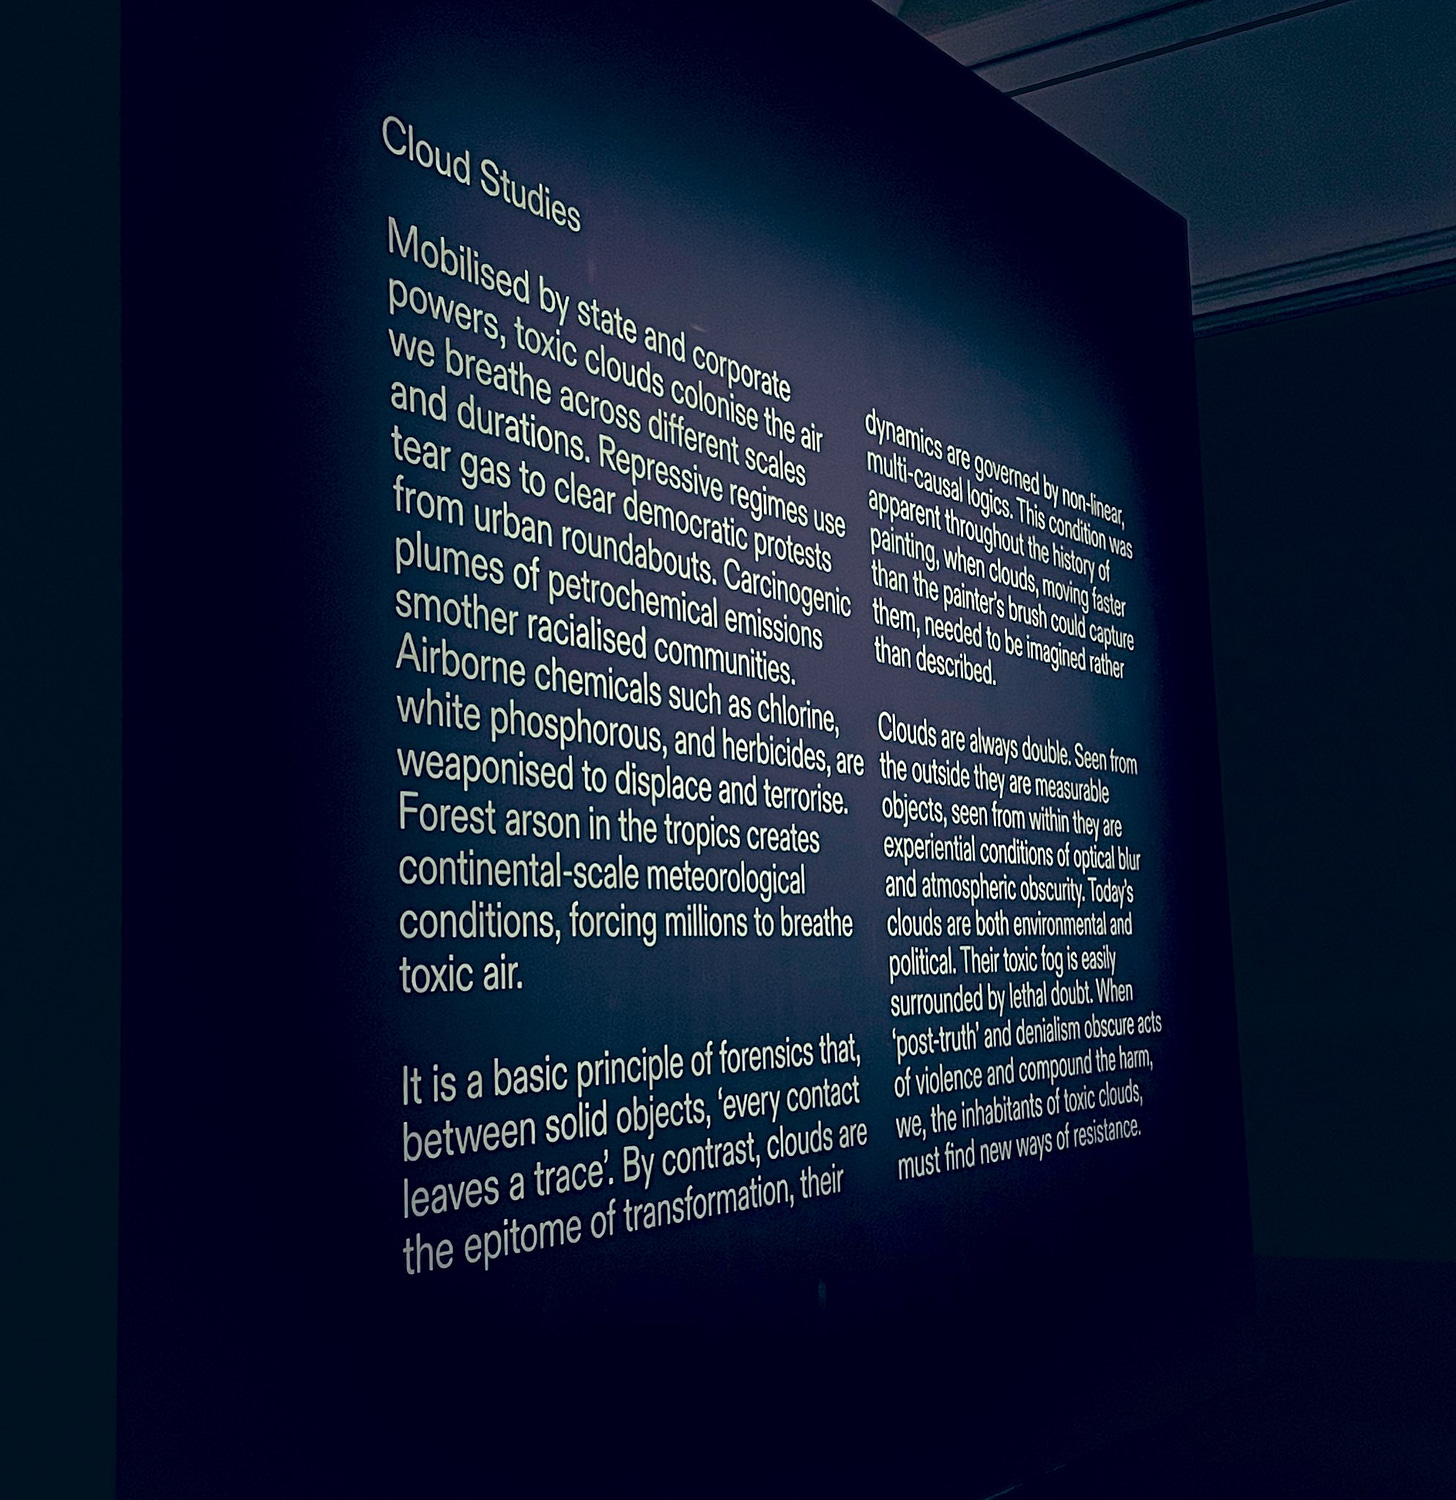 the exhibit information on the wall on “cloud studies” . The information is in white text in a dark room.